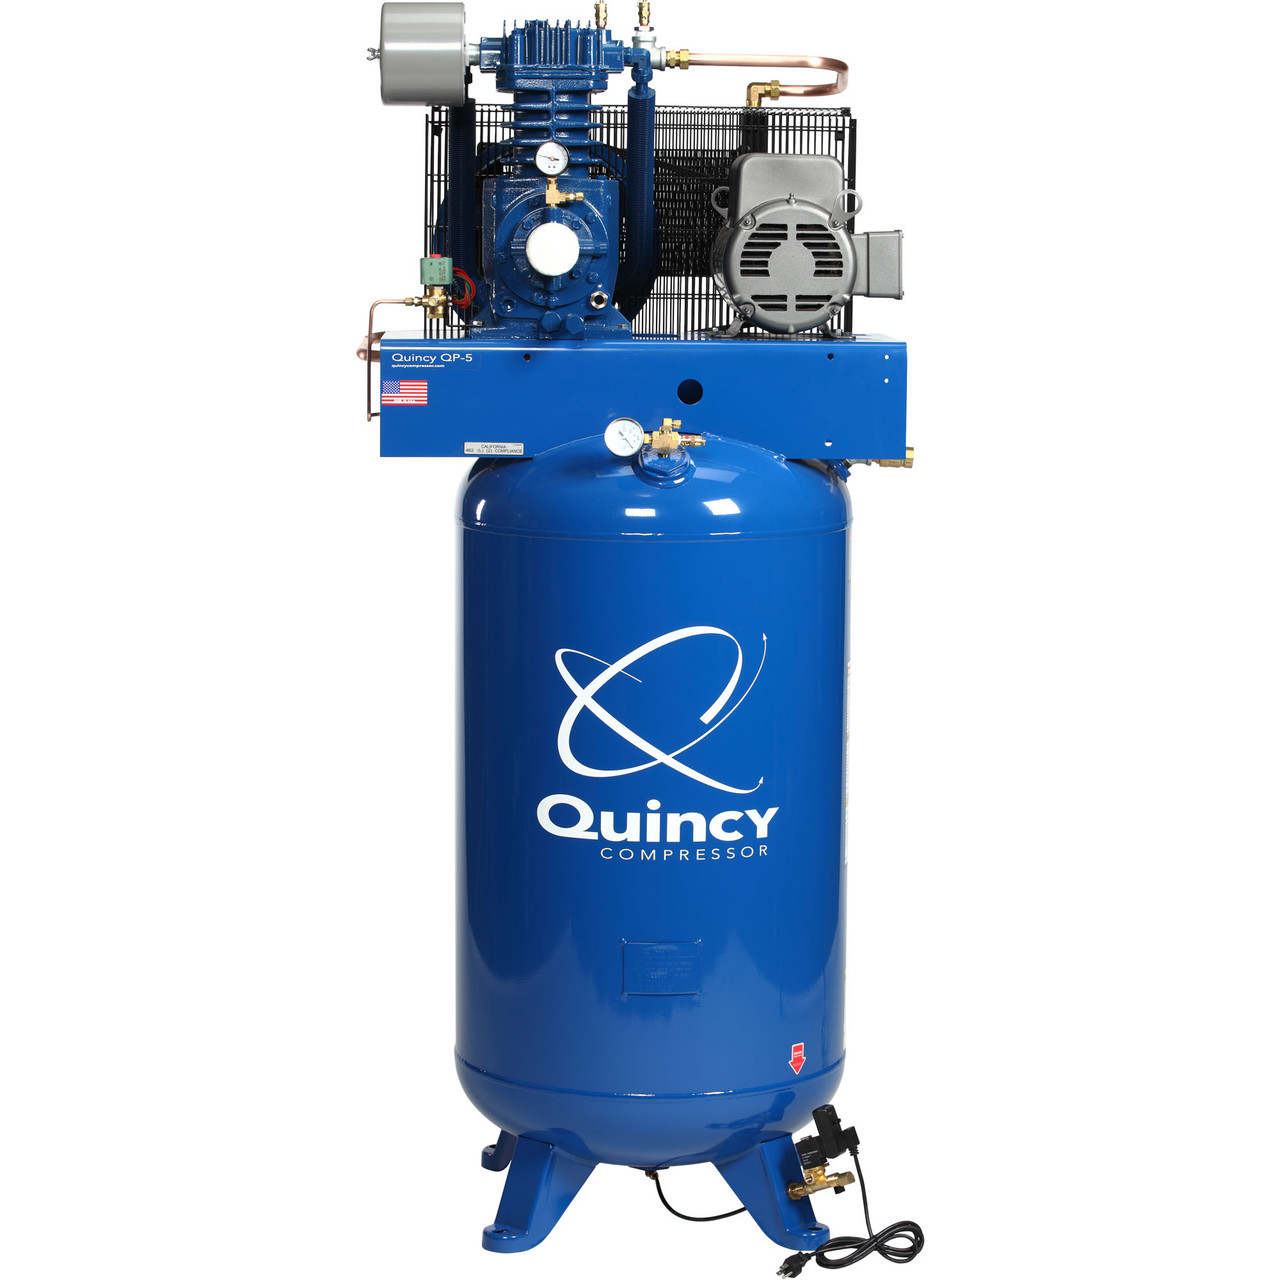 Quincy QP 373D80VCA46M 7.5 HP MAX, 460 Volt Three Phase, Two Stage, 80 Gallon Vertical Air Compressor